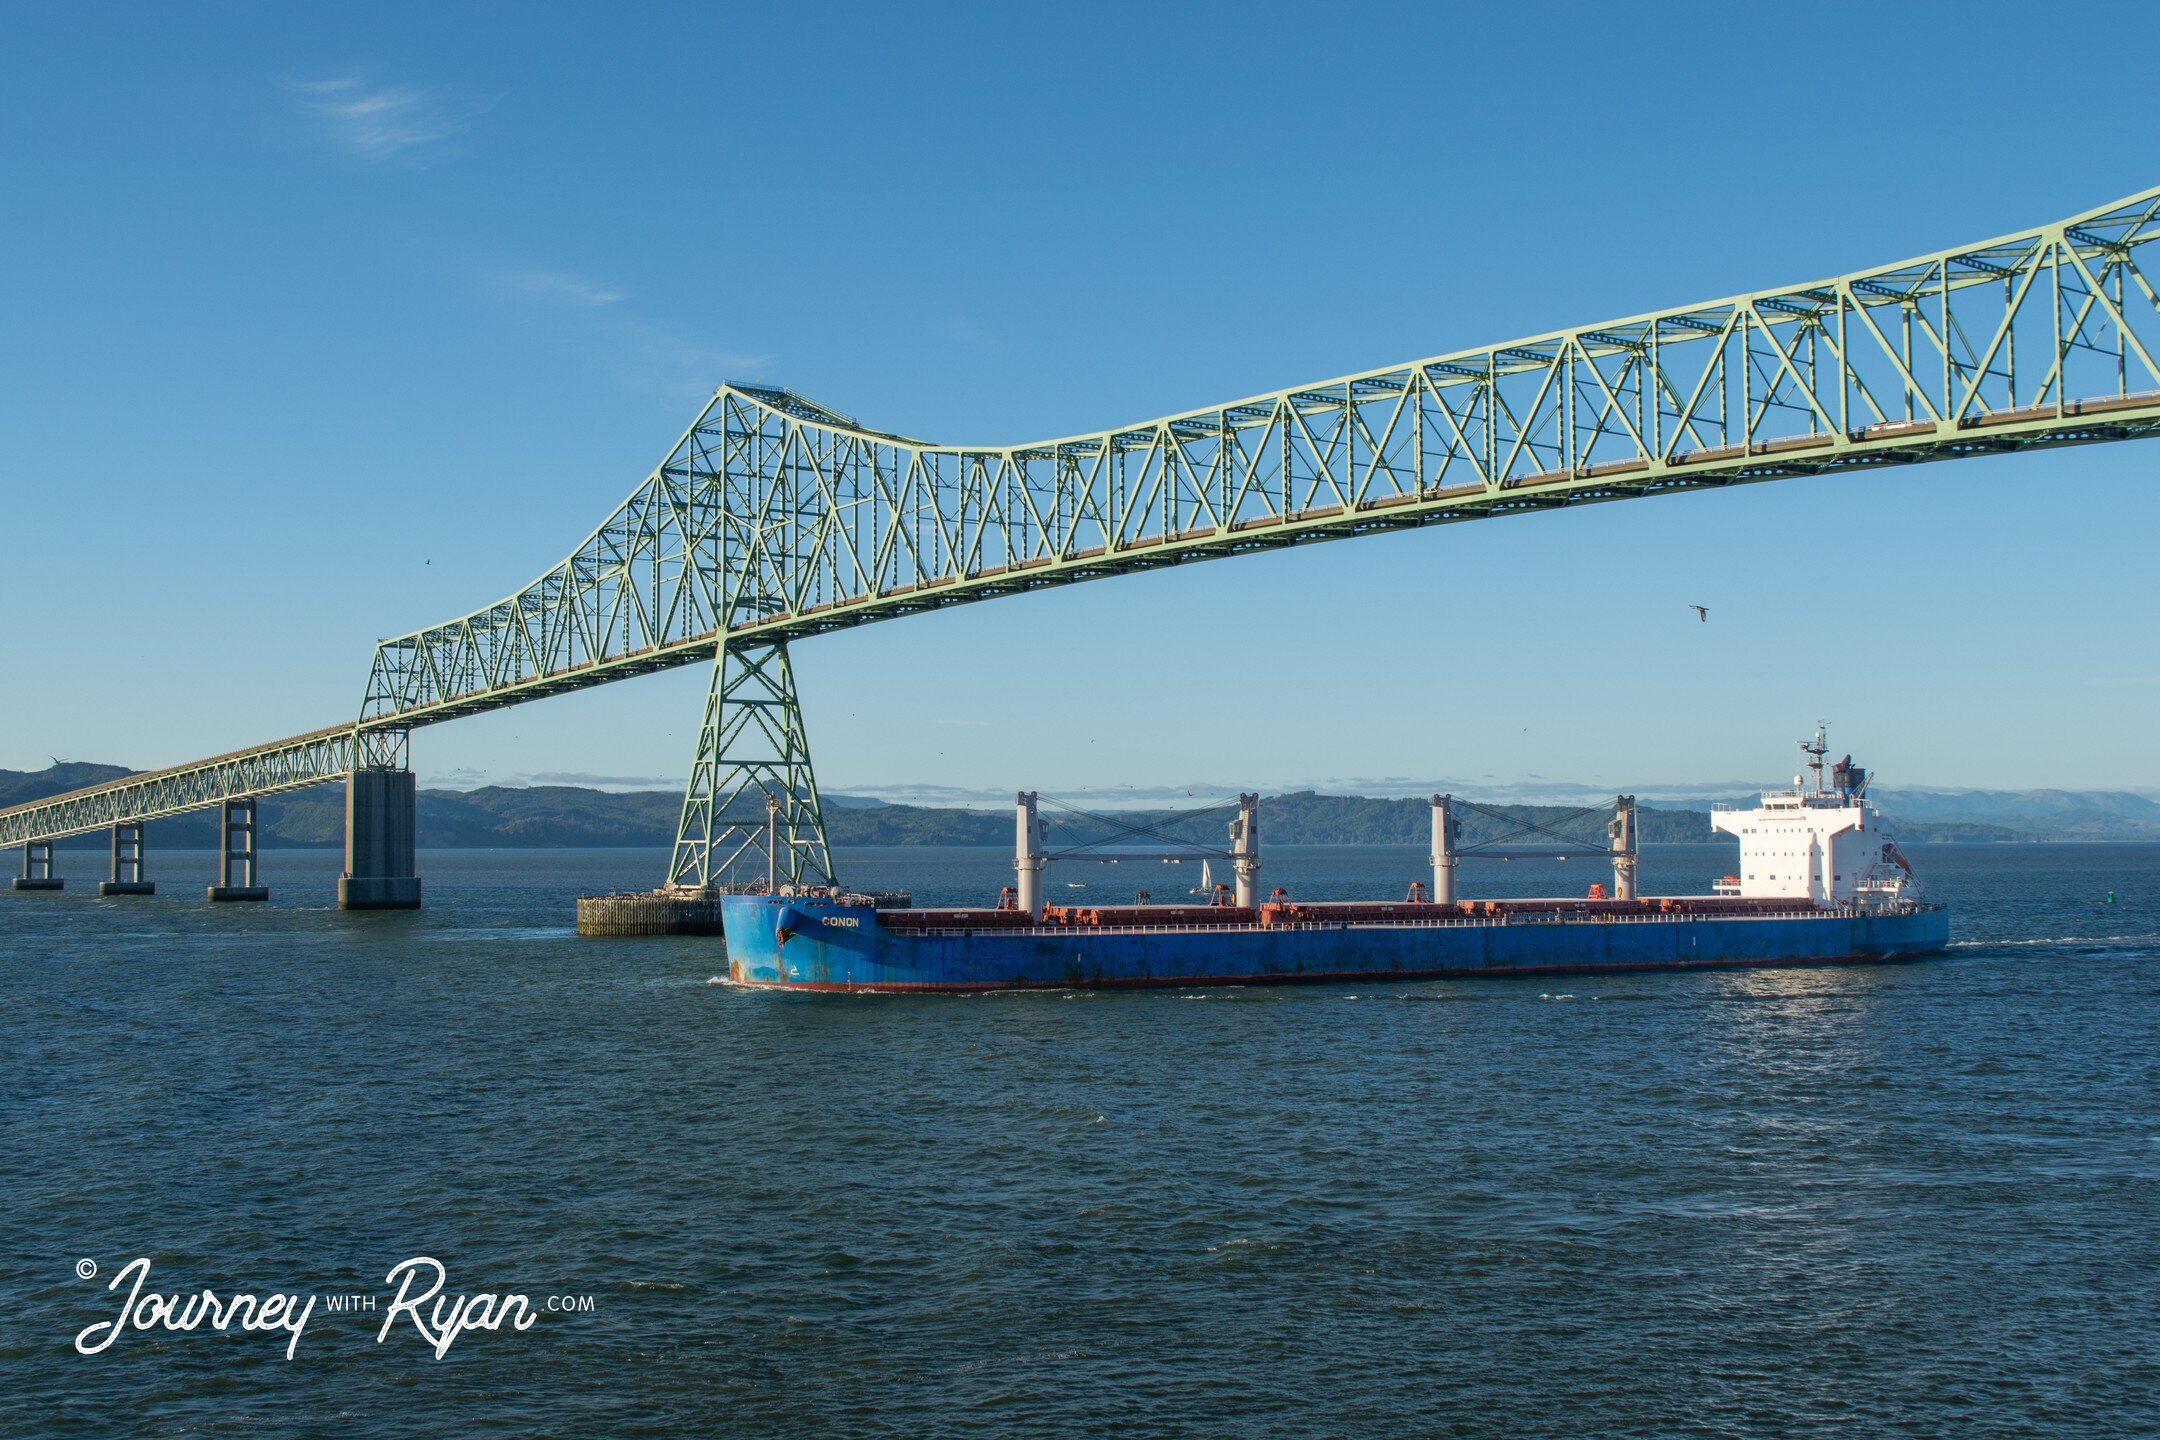 Cargo 🚢
.
The frequent view of a cargo ship passing under the bridge is so calming, rain or shine.
.
Shot at @cannerypierhotel
.
📷 #nikonz6ii
.
#journeywithryan #oregon #astoria #astoriaoregon #oregoncoast #thegoonies #pacificocean #columbiariver #